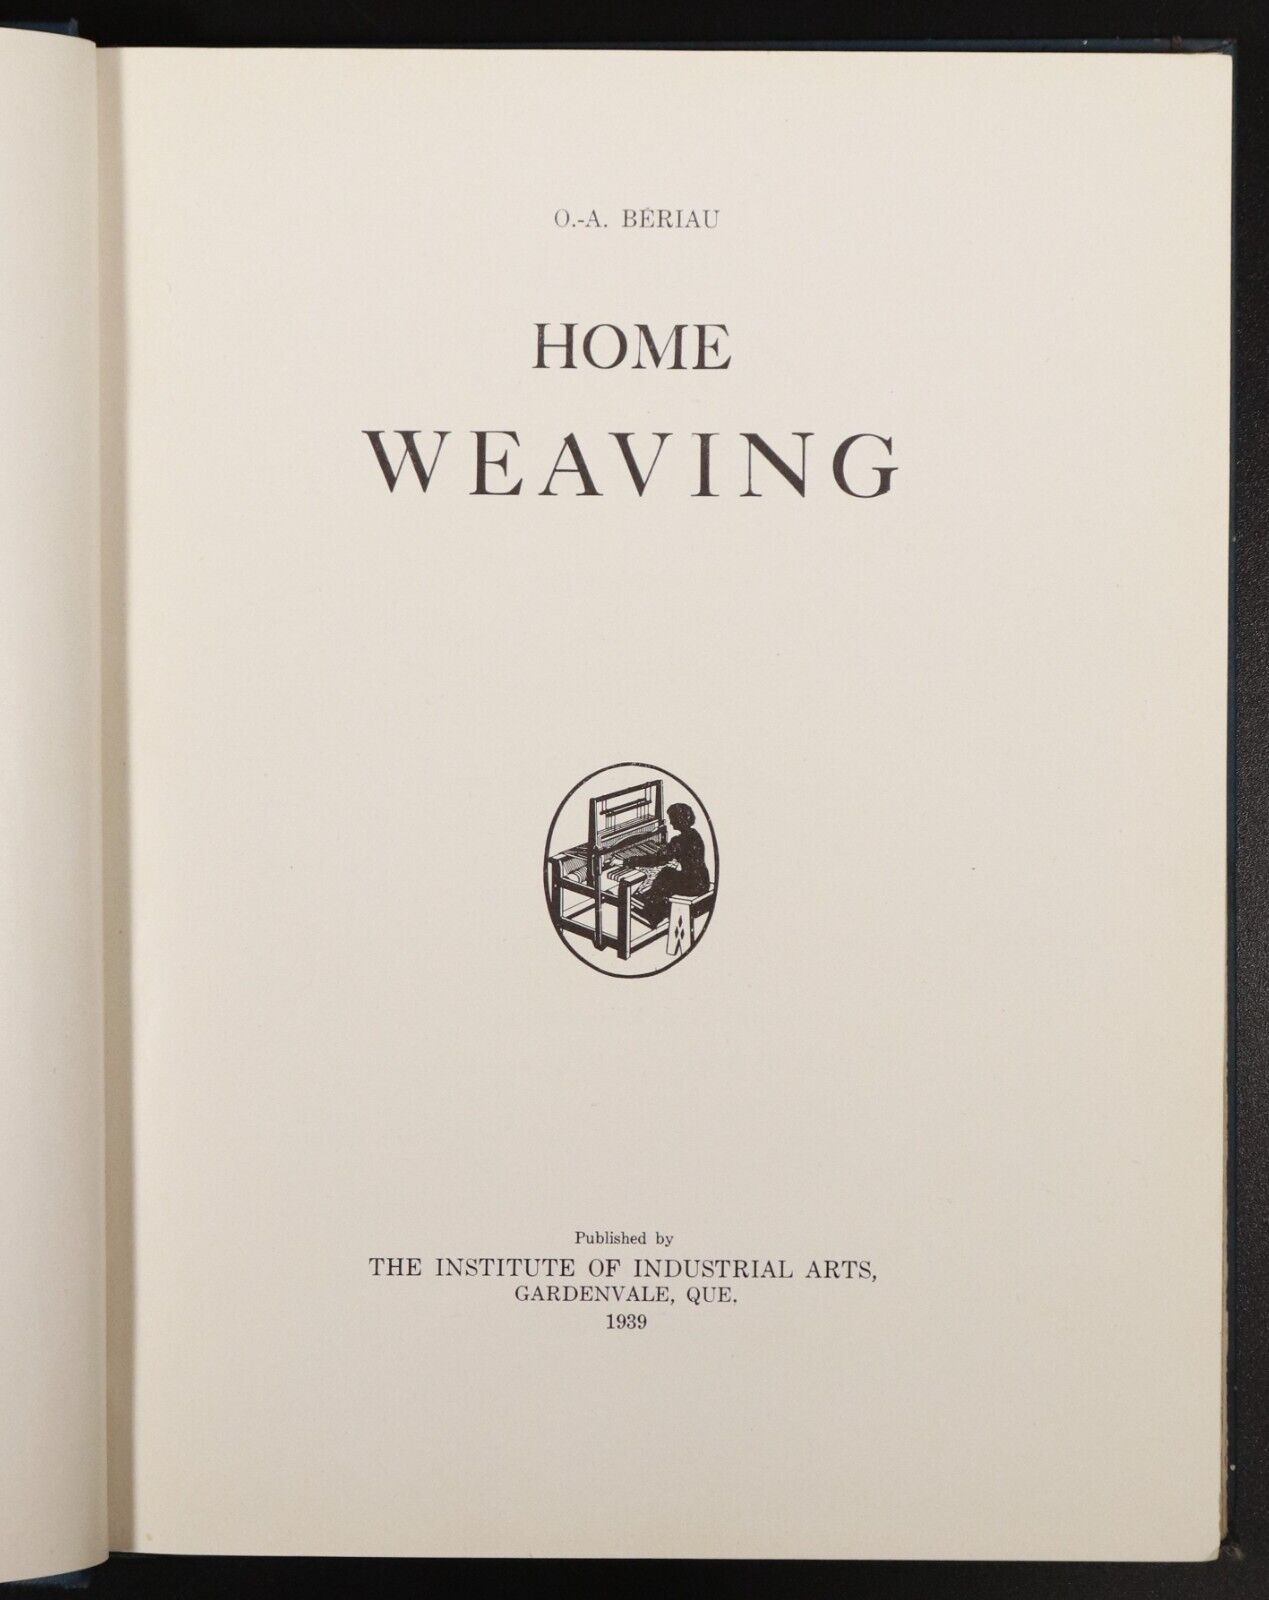 1939 Home Weaving by O.A. Beriau Antique Craft Book Industrial Arts Quebec - 0